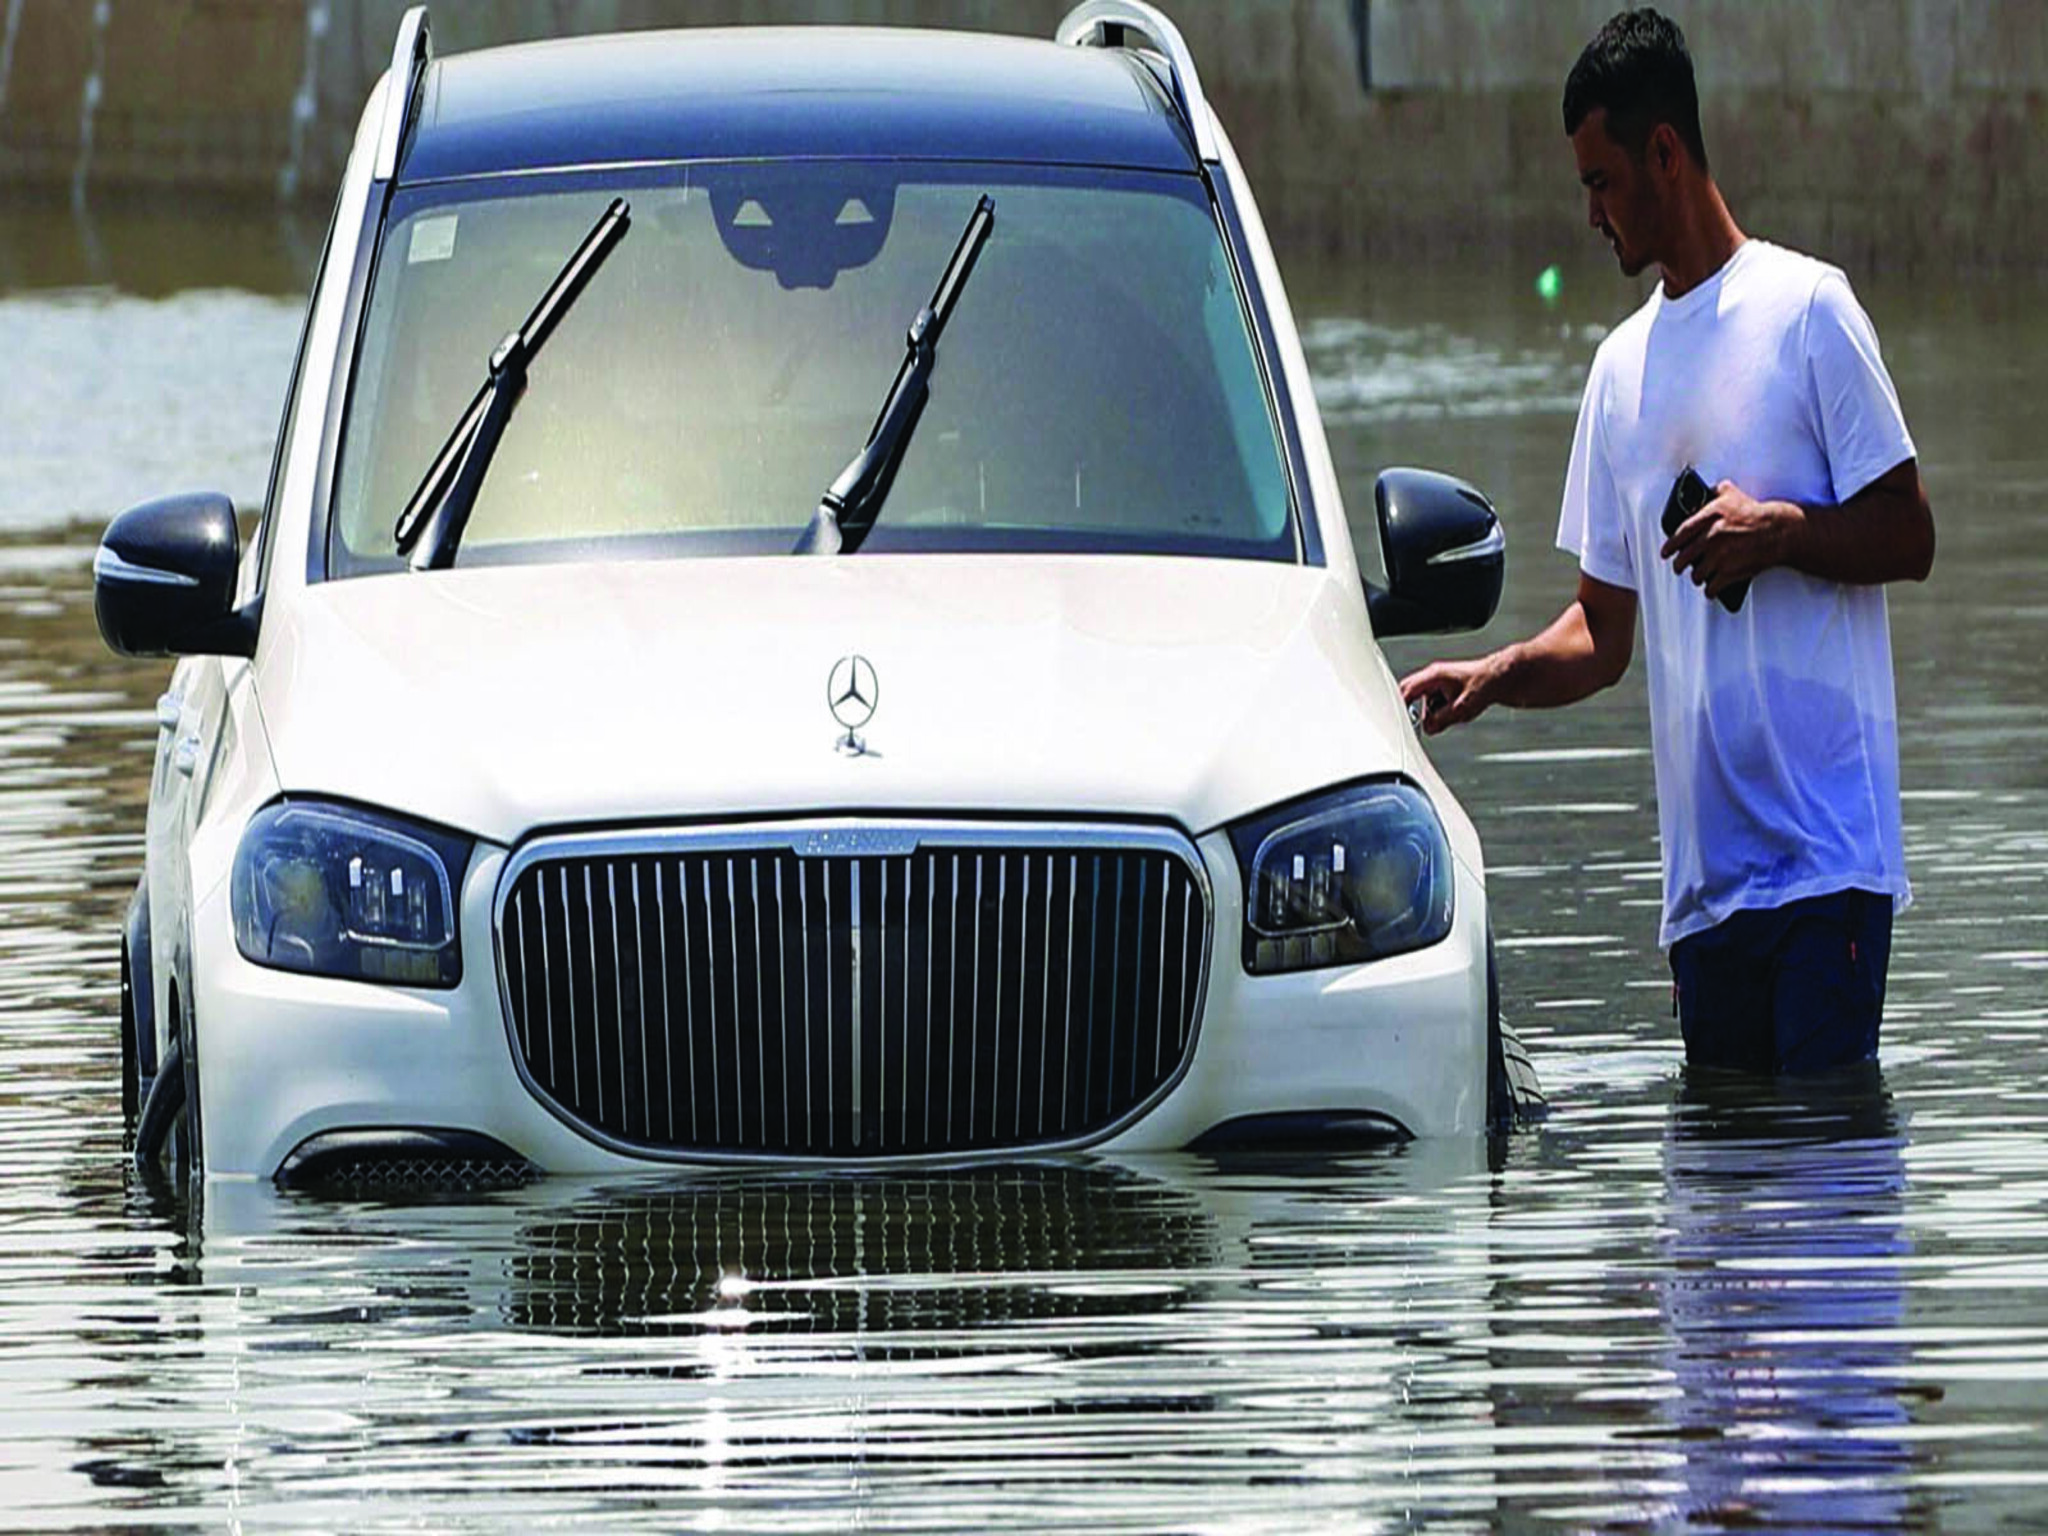 car insurance in The UAE reject rain-damaged claims For this reason